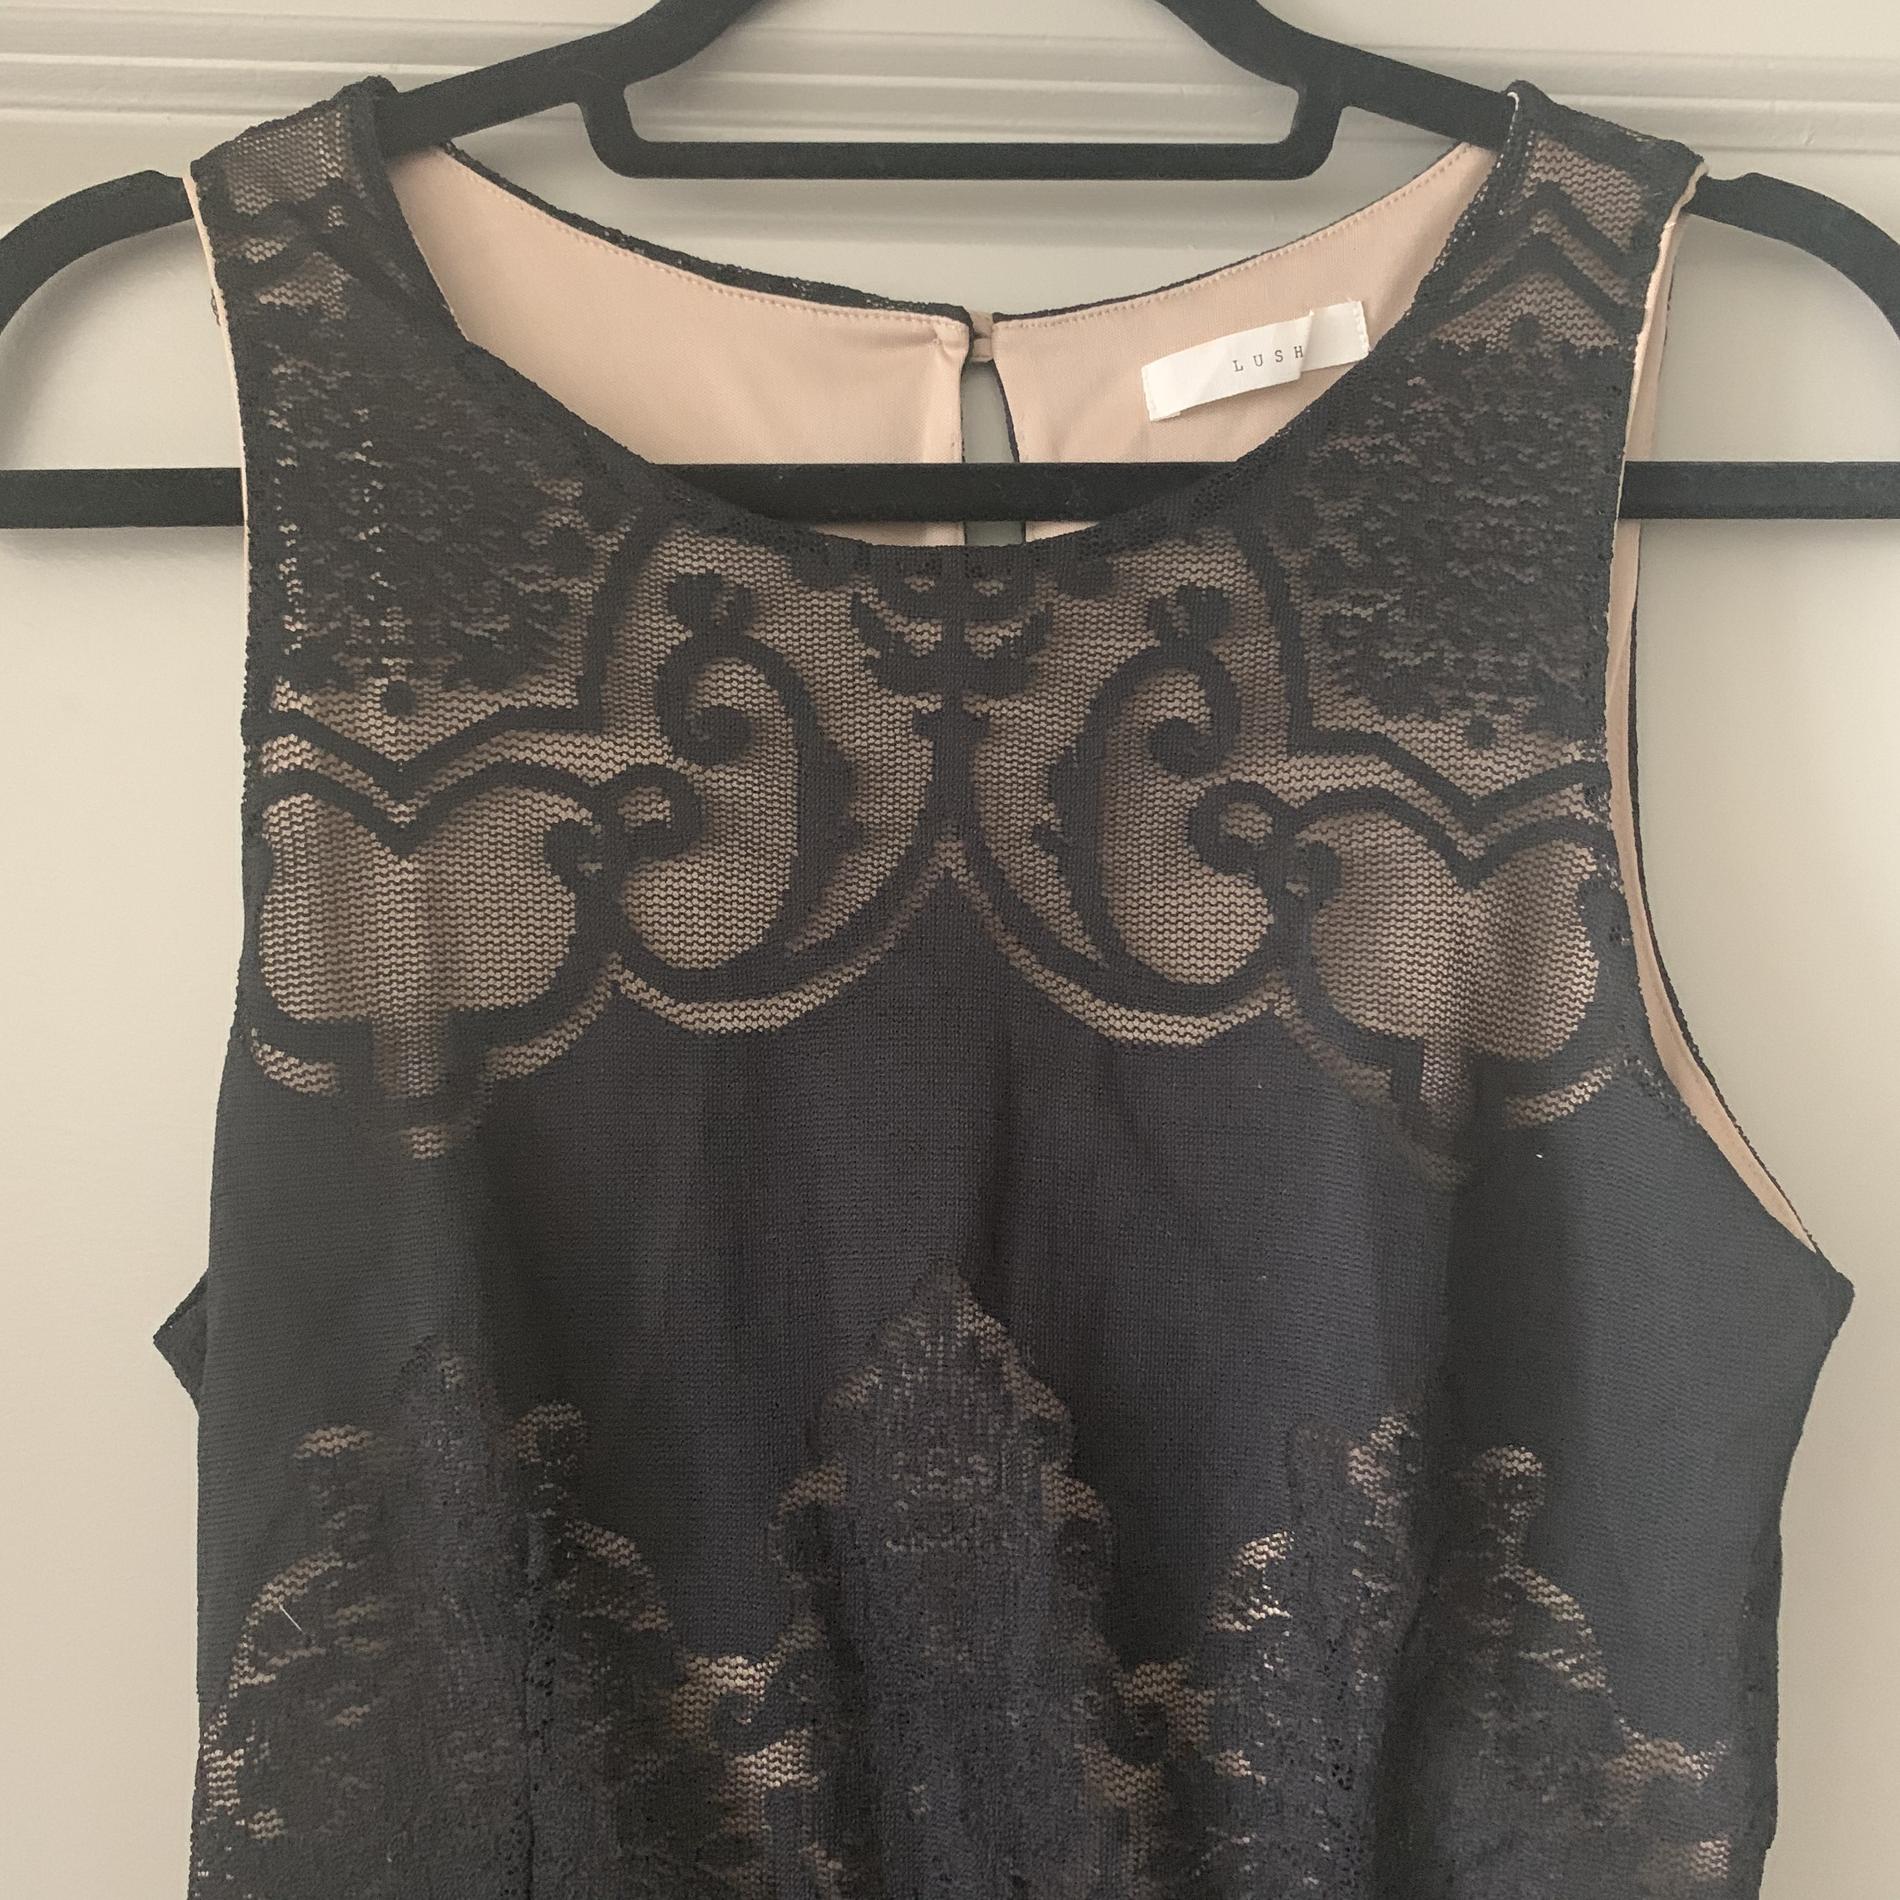 Lush Size 12 Lace Black Cocktail Dress on Queenly